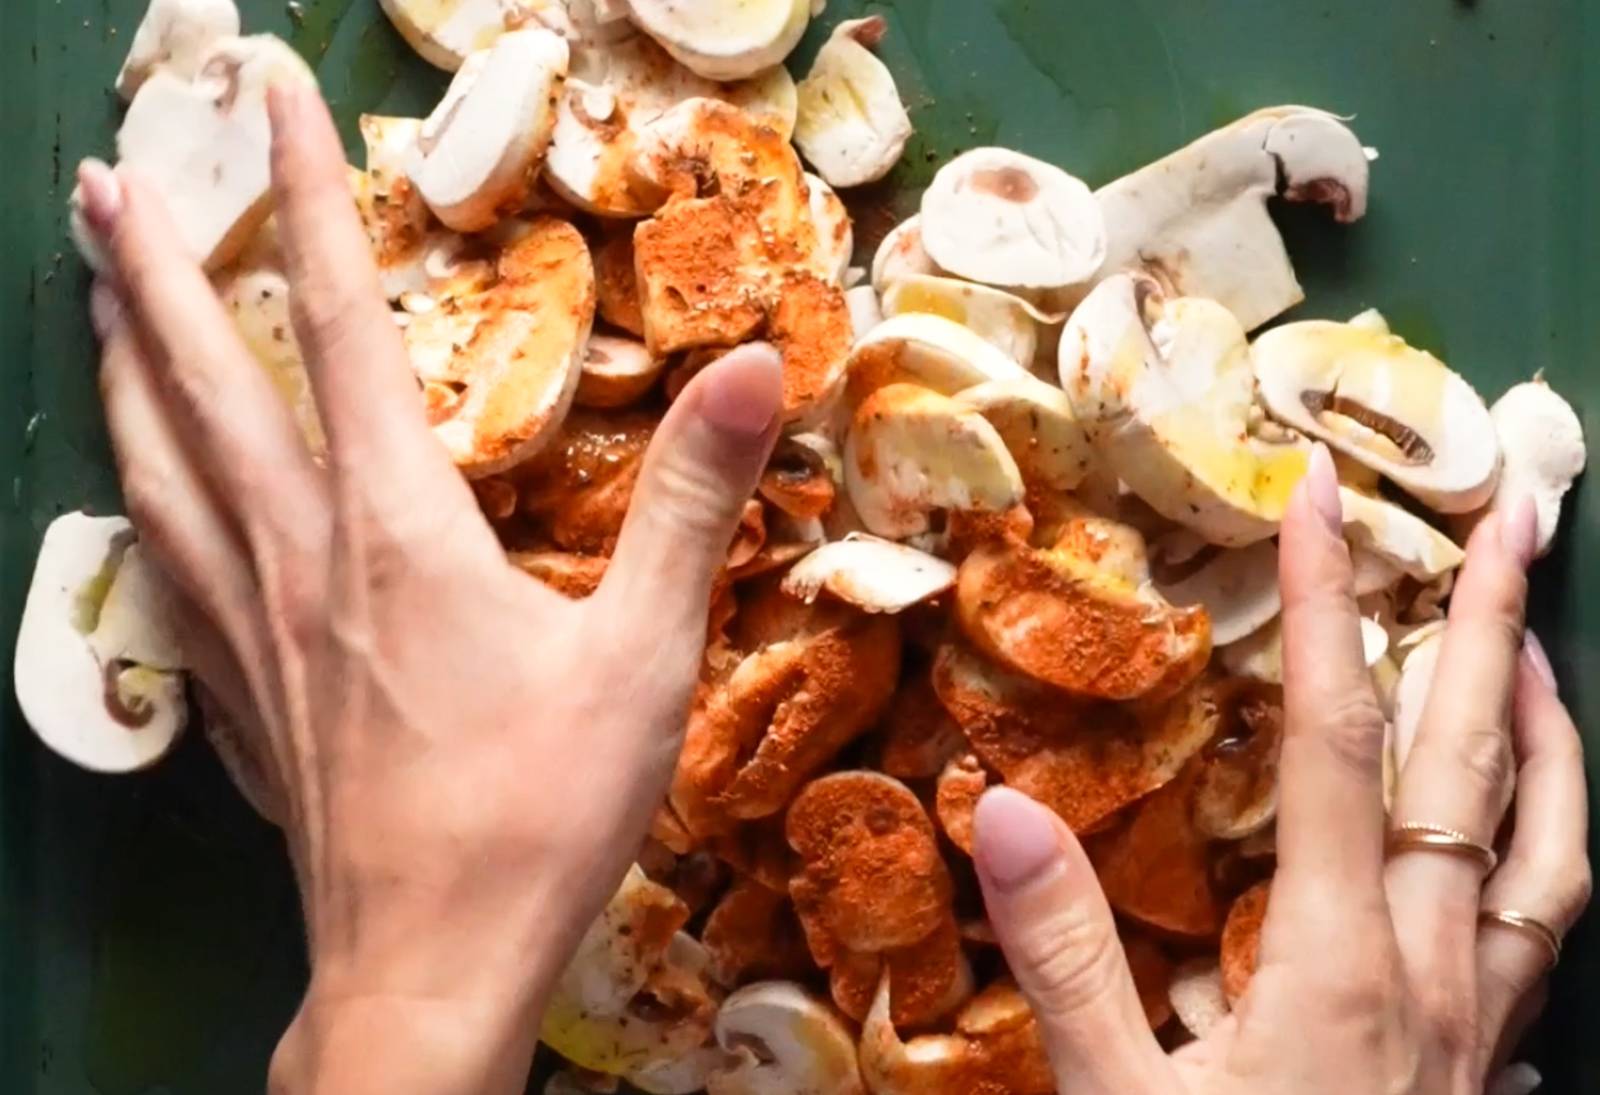 Hands mixing sliced mushrooms with oil and spices.